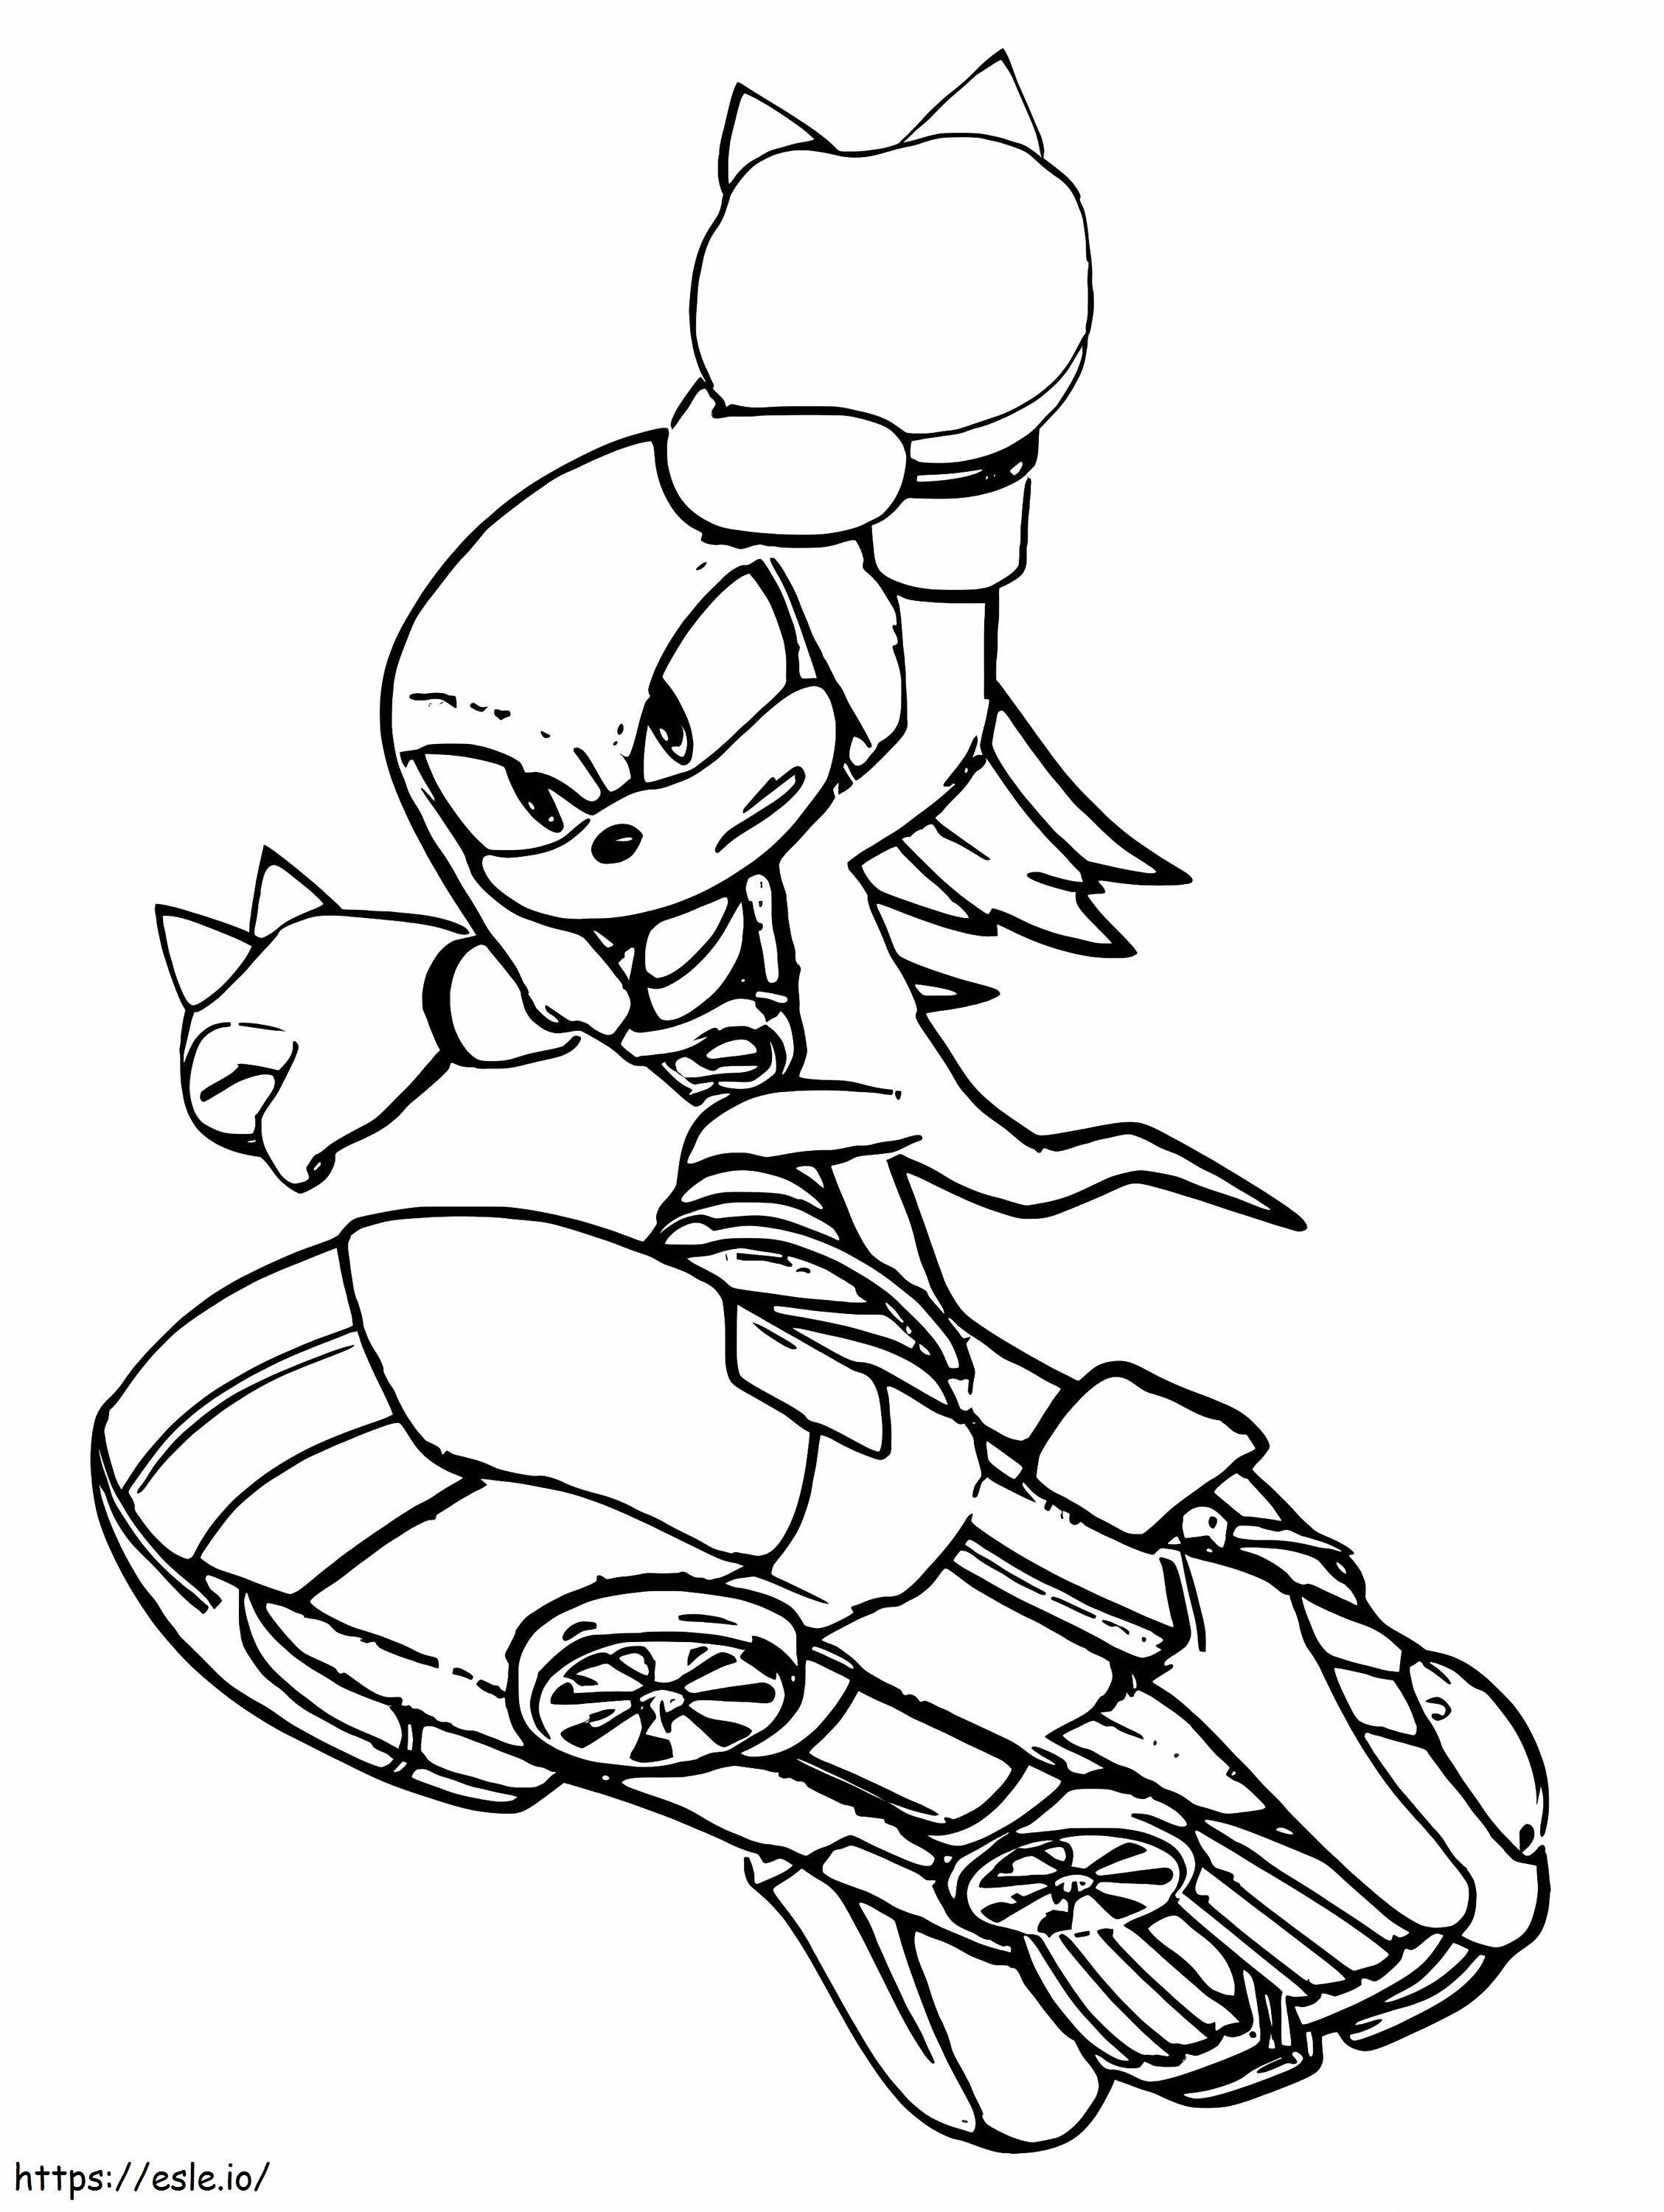 Knuckles The Echidna On Board coloring page